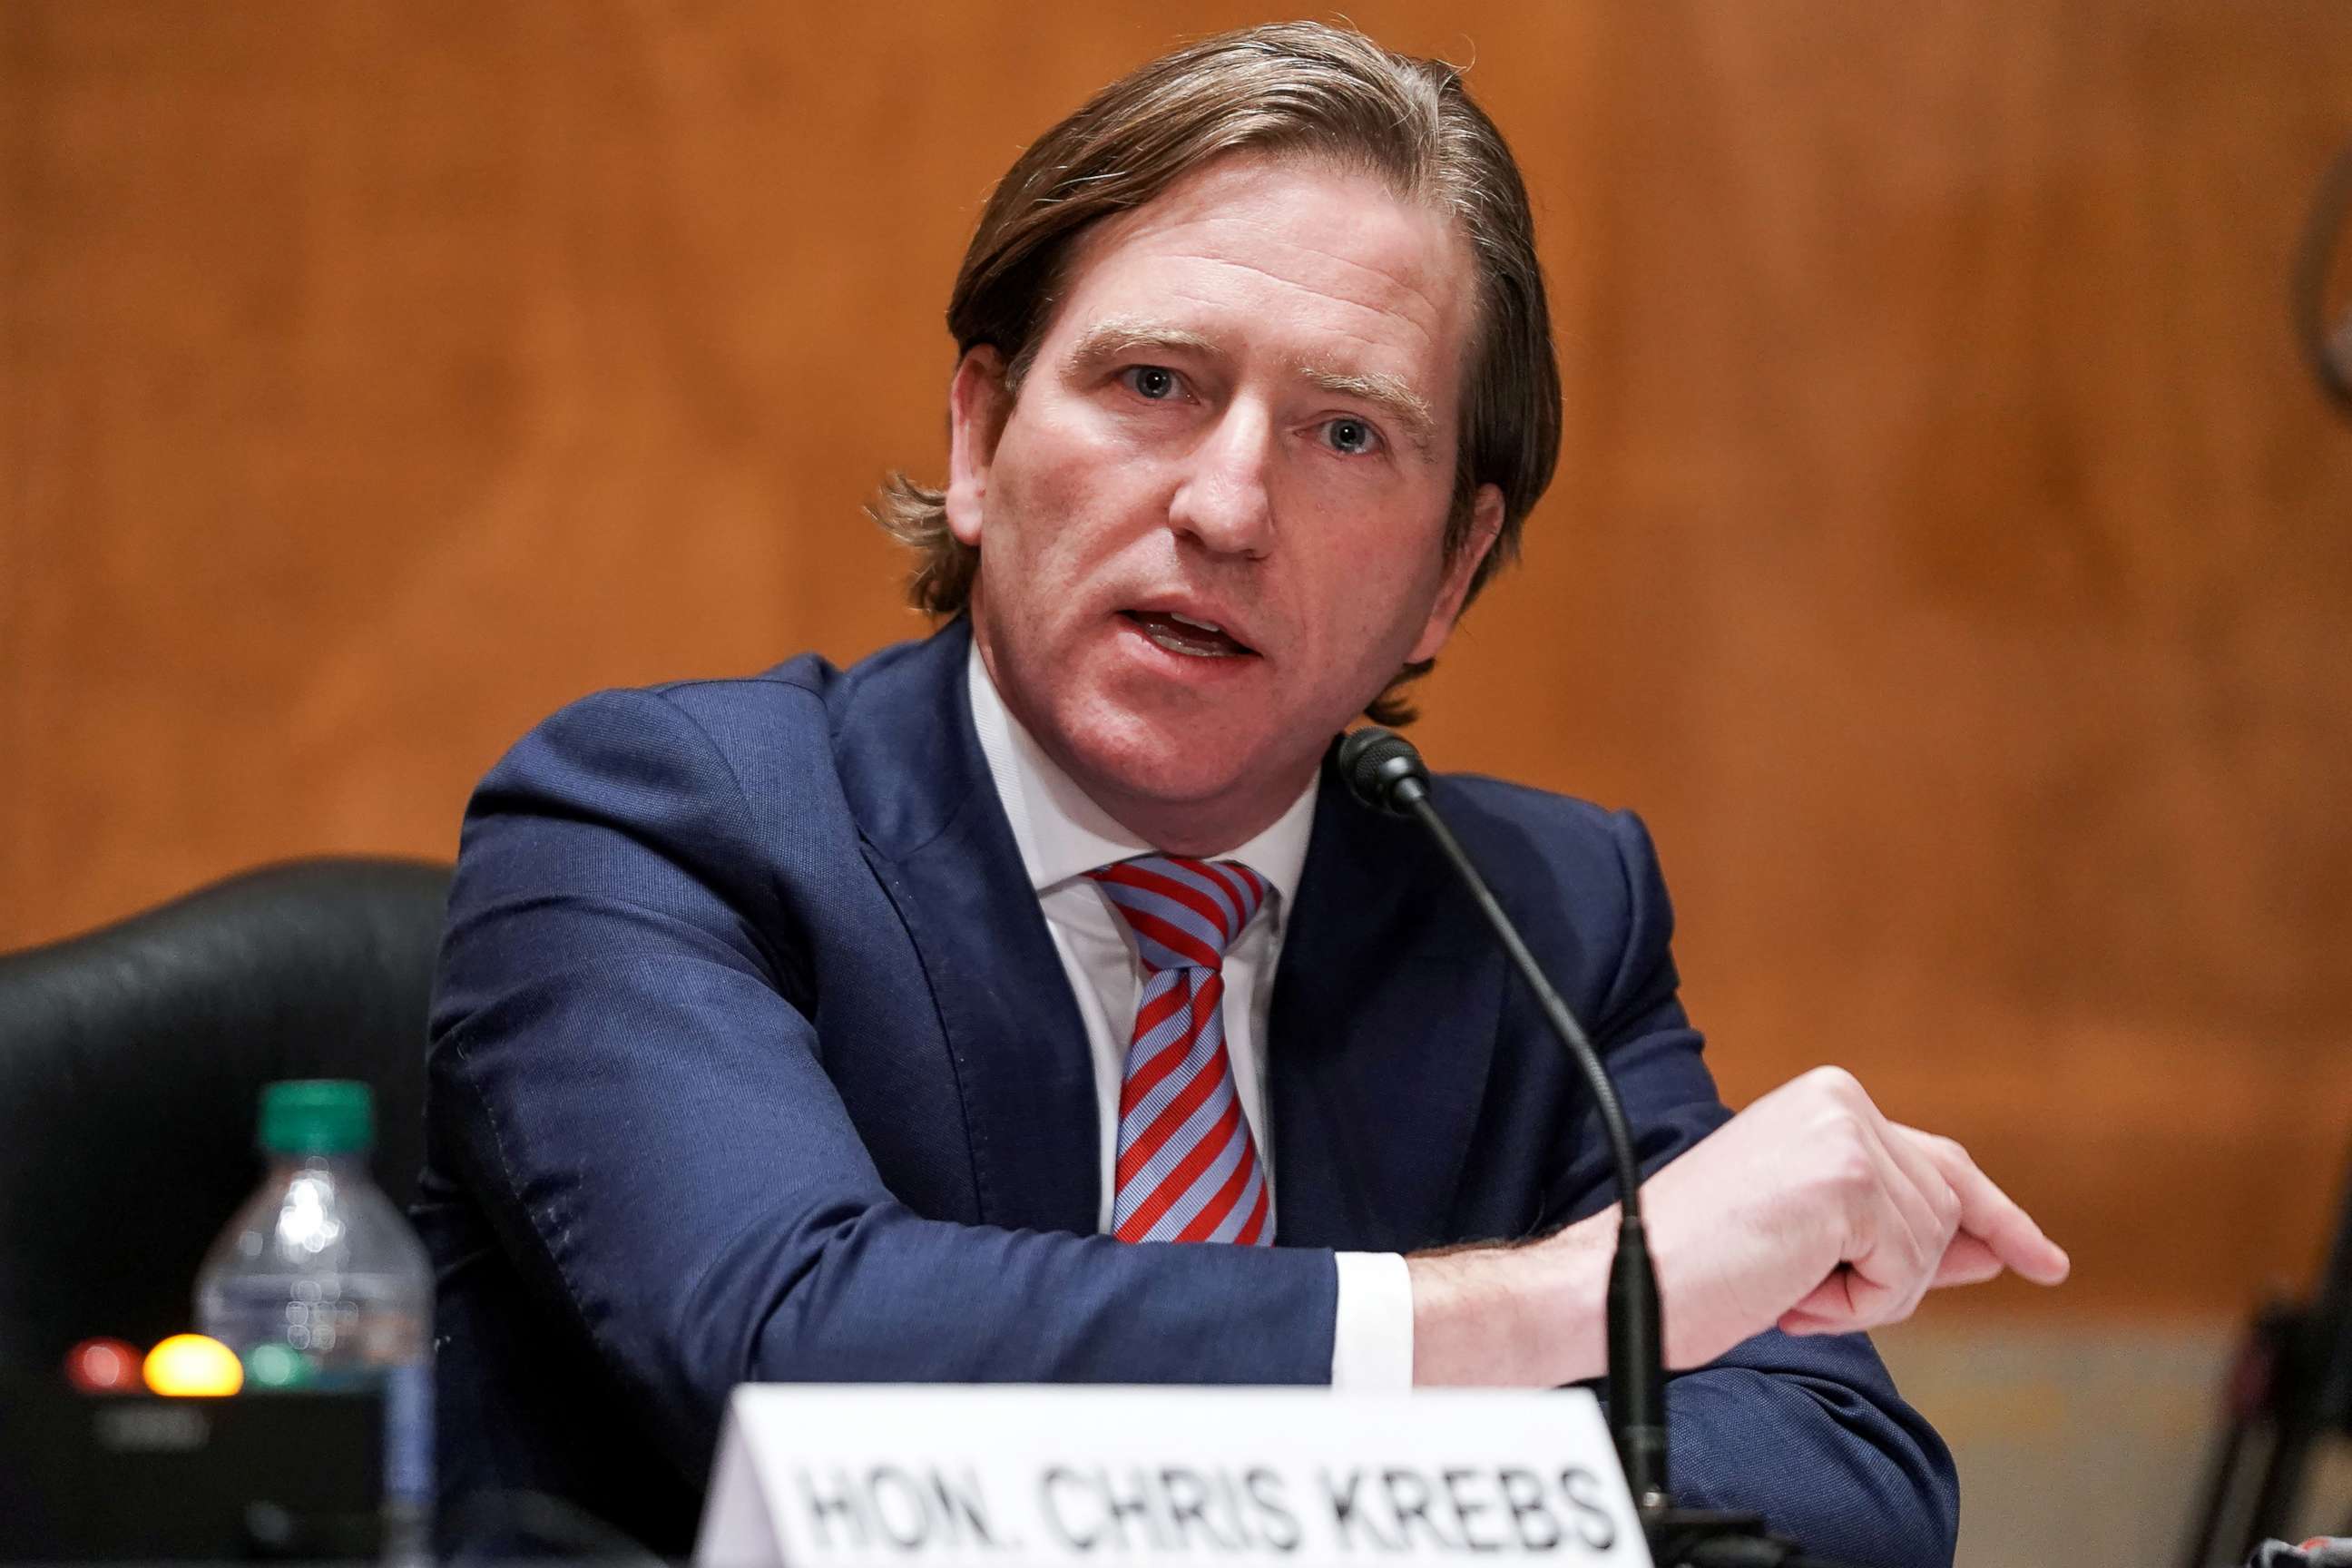 PHOTO: Christopher Krebs, former director of the Cybersecurity and Infrastructure Security Agency, testifies during a Senate Homeland Security & Governmental Affairs Committee hearing in Washington, D.C., Dec. 16, 2020.